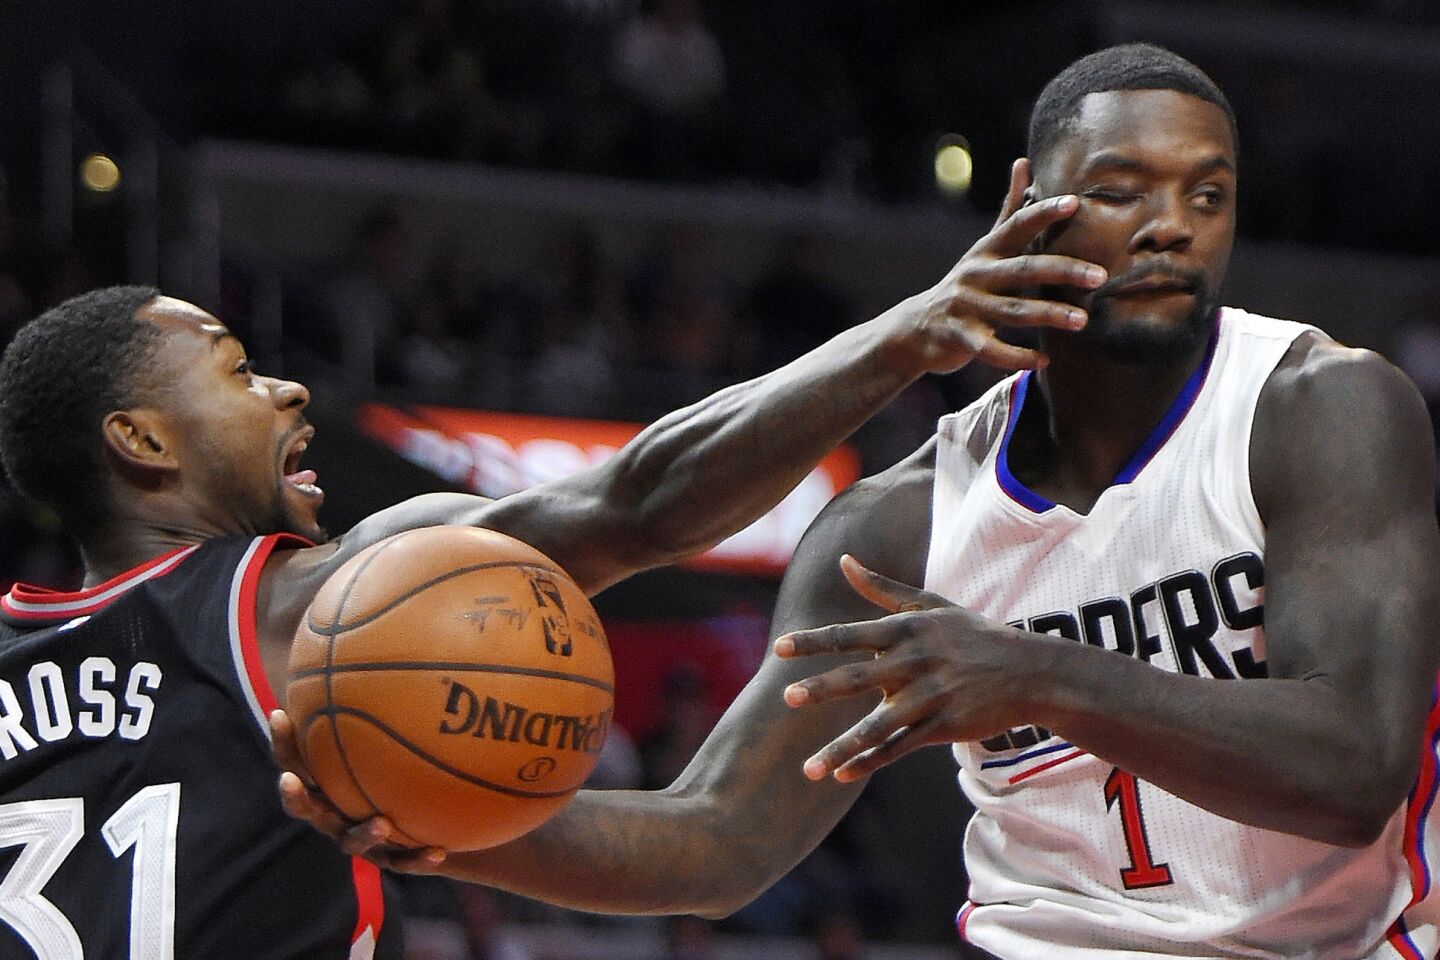 Clippers lose third in a row with 91-80 loss to Toronto Raptors